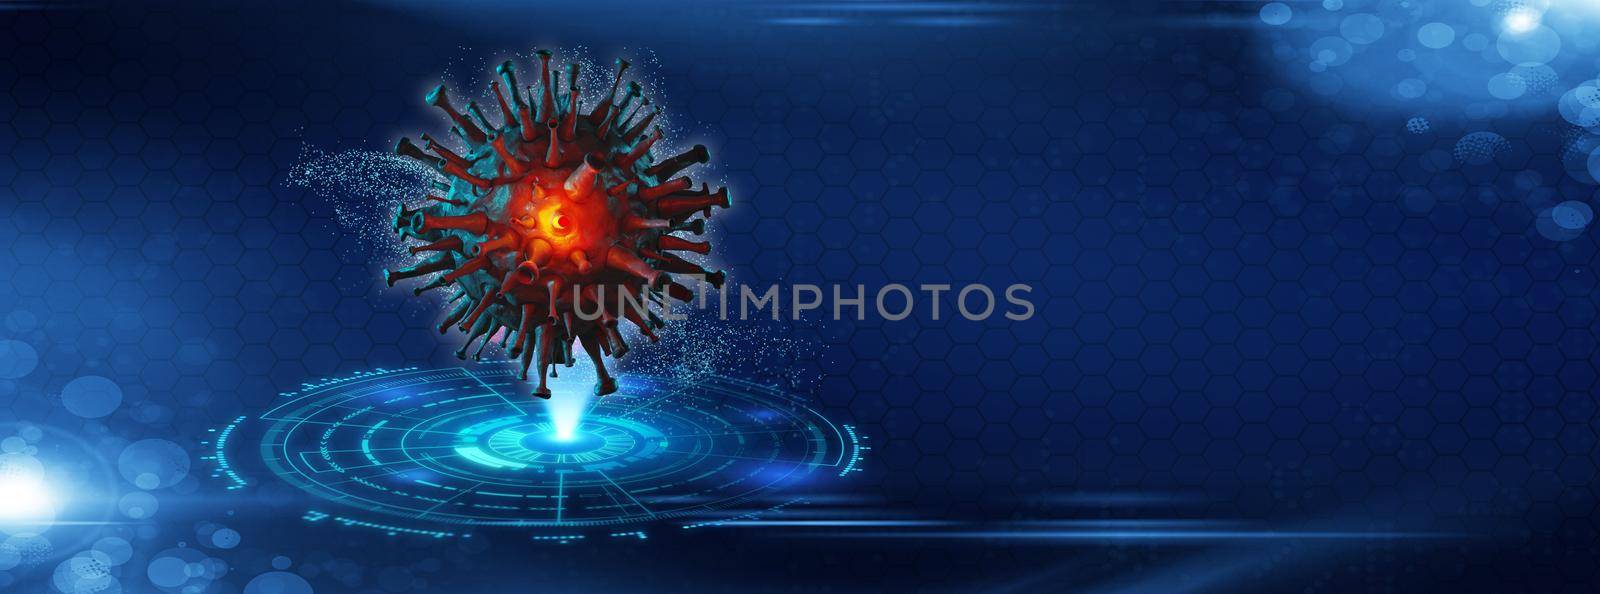 New covid-19 conoravirus outbreak. 3D illustration by Taut